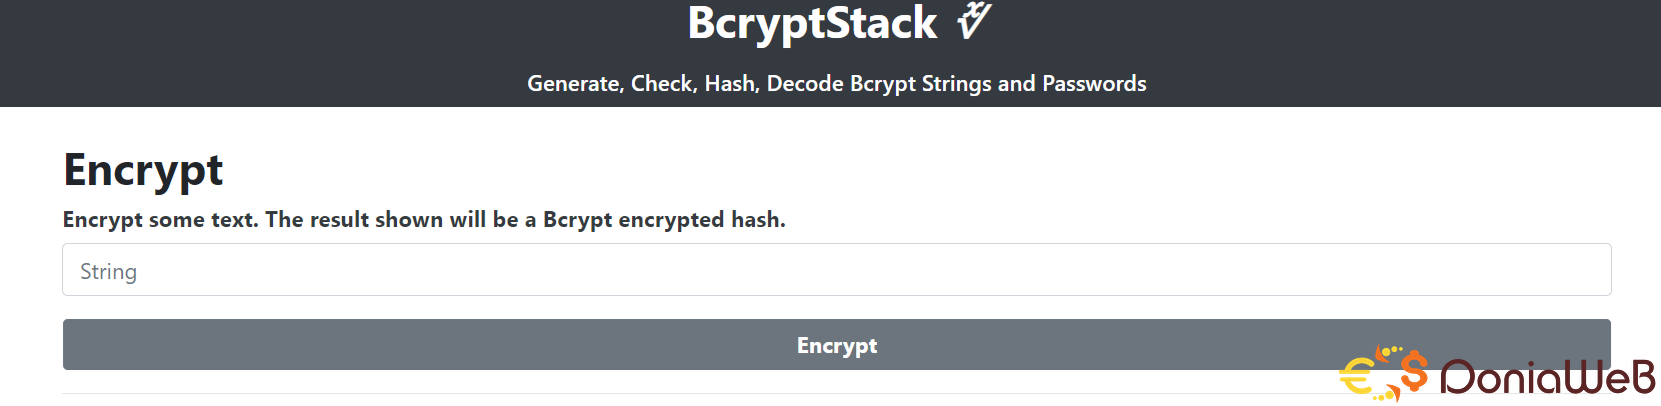 BcryptStack | Generate, Check, Hash, Decode Bcrypt Strings and Passwords